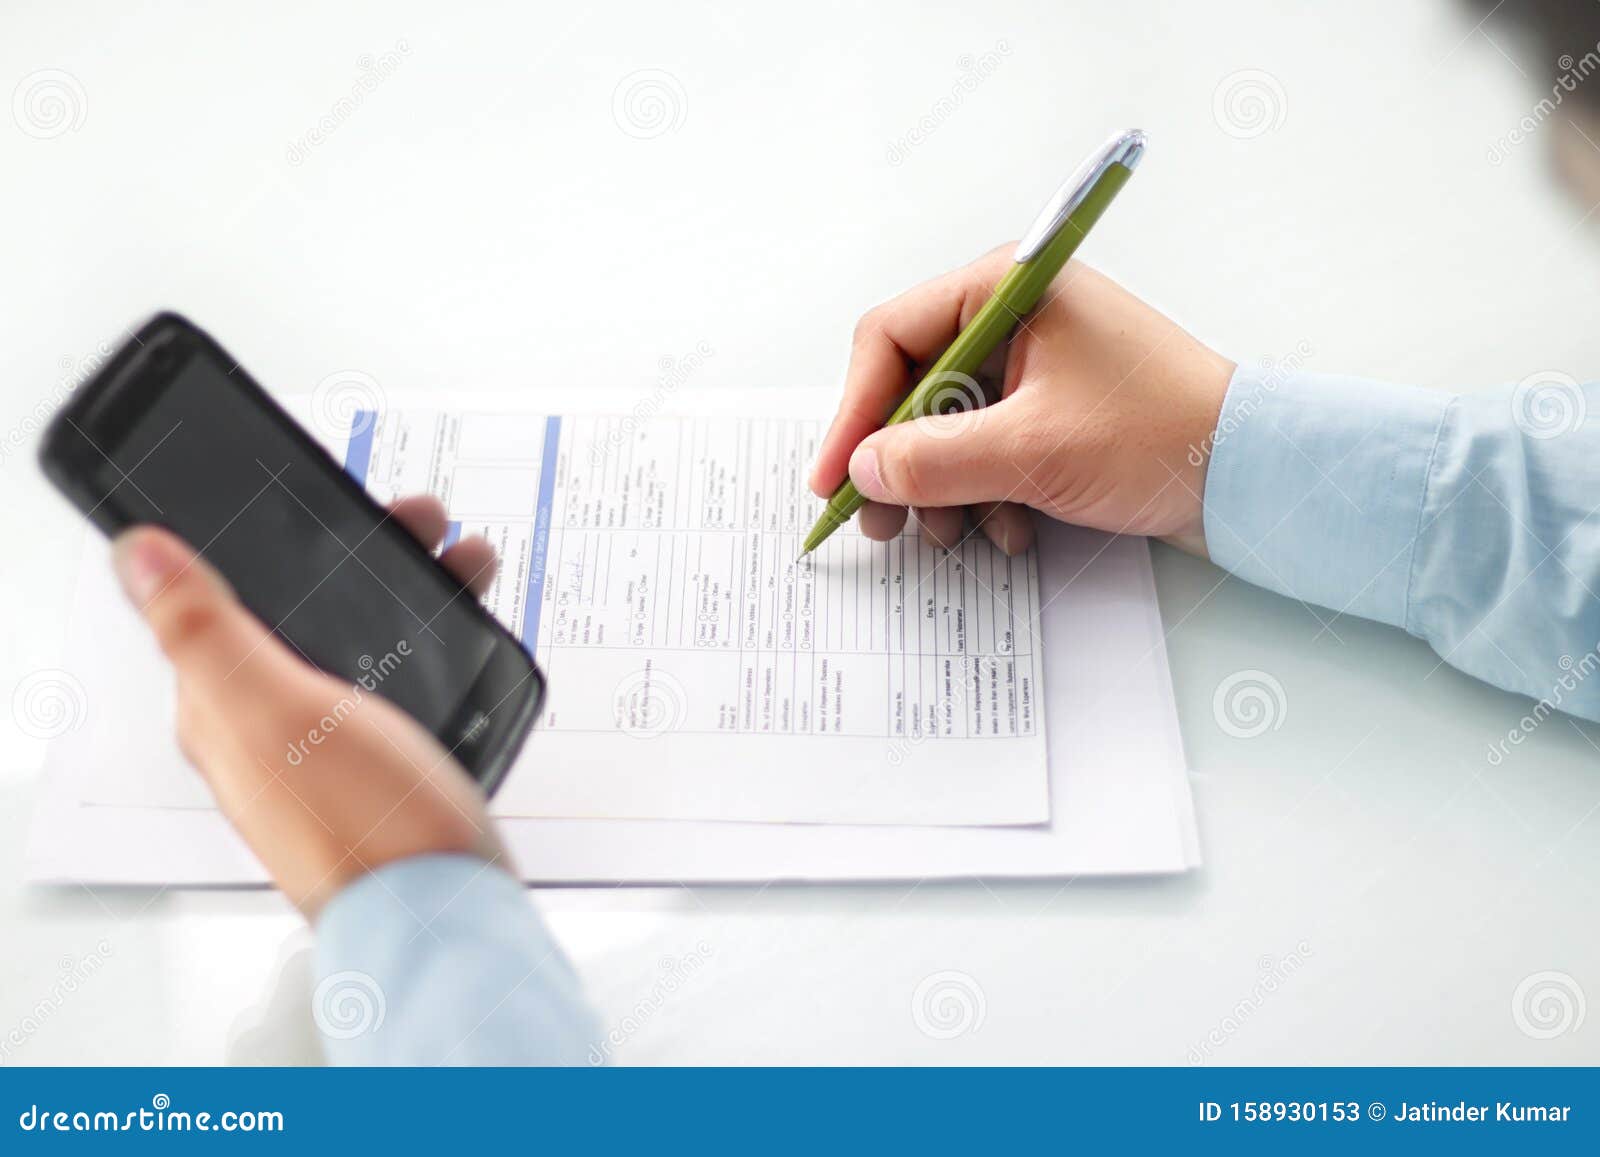 Picture of pen stock image. Image of concept, notepad - 158930153